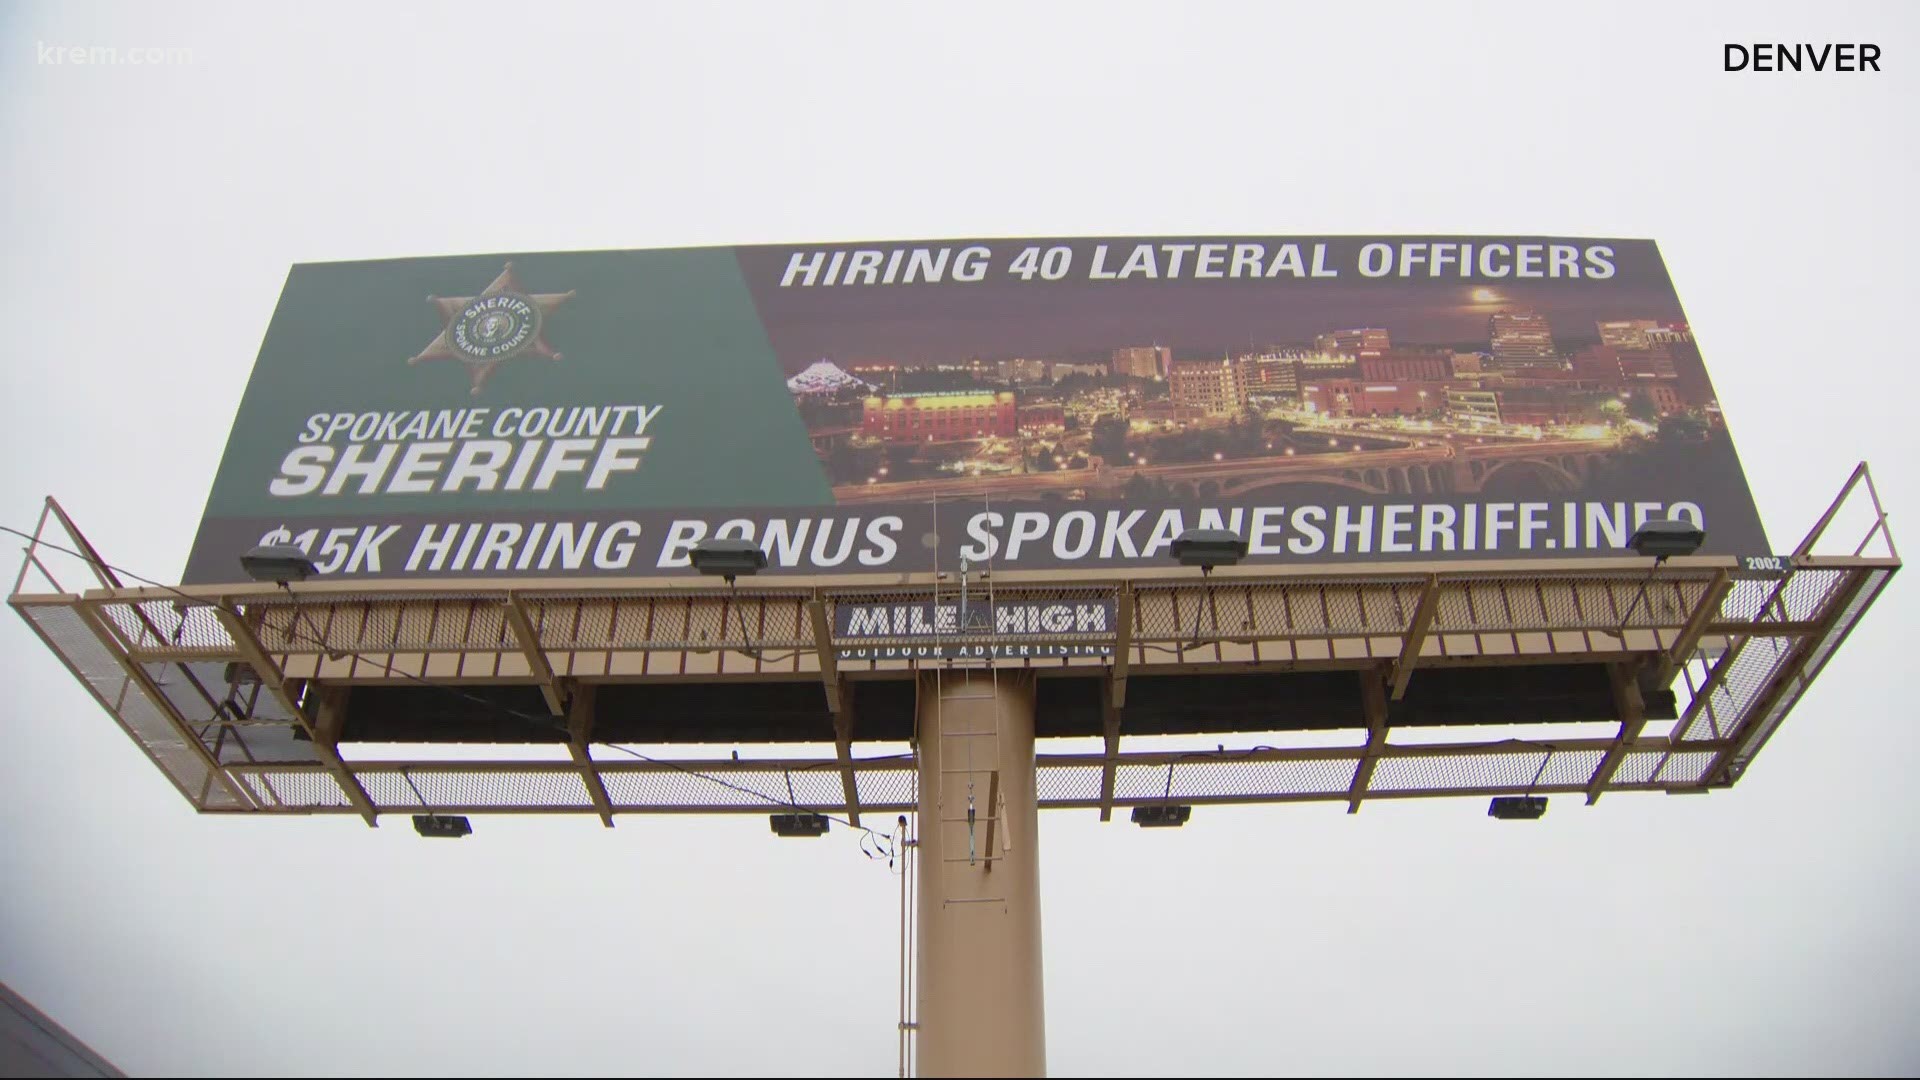 The Spokane County Sheriff's Office is looking to hire away experienced officers from big police departments in Seattle, Portland, and Denver.